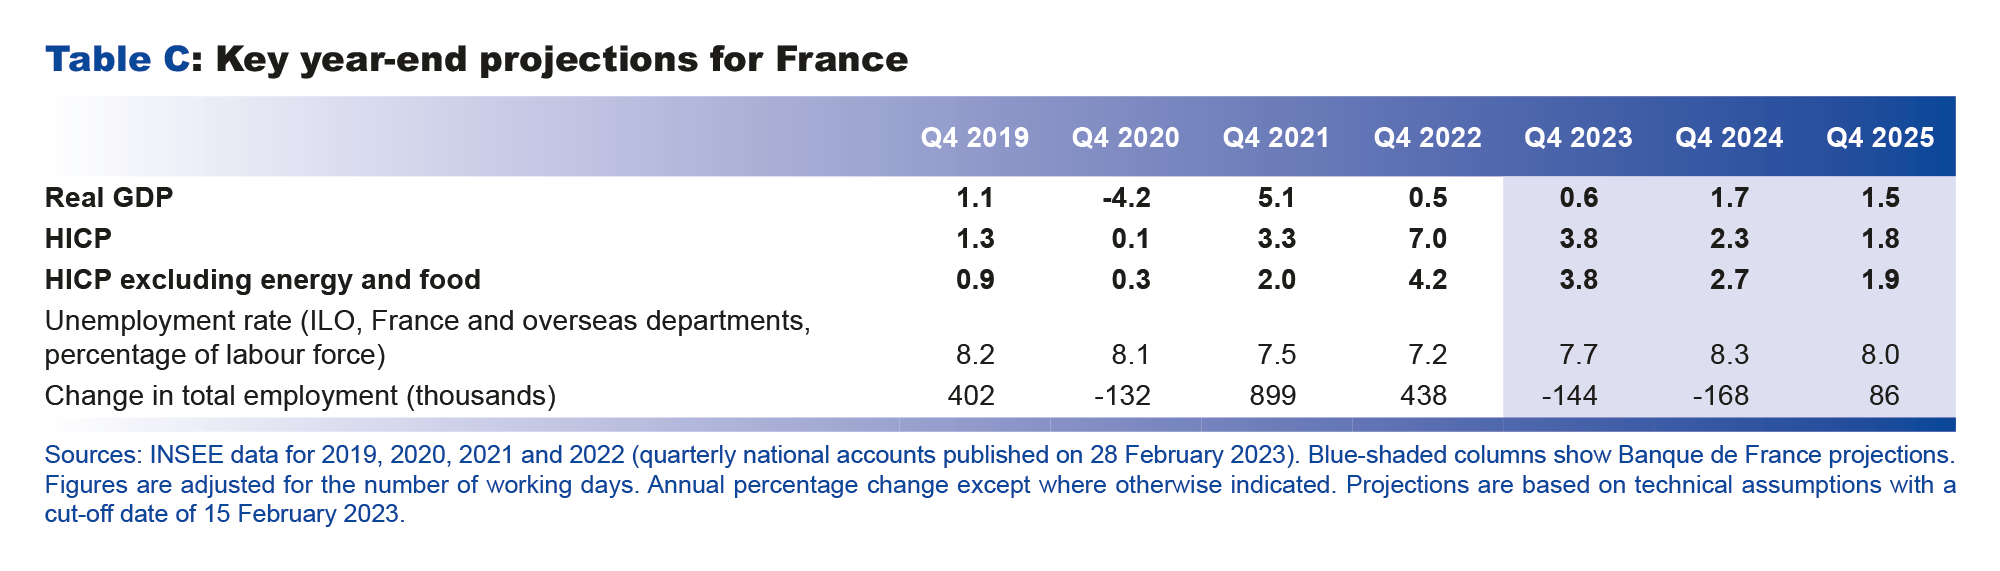 Macroeconomic projections – March 2023 - Key year-end projections for France